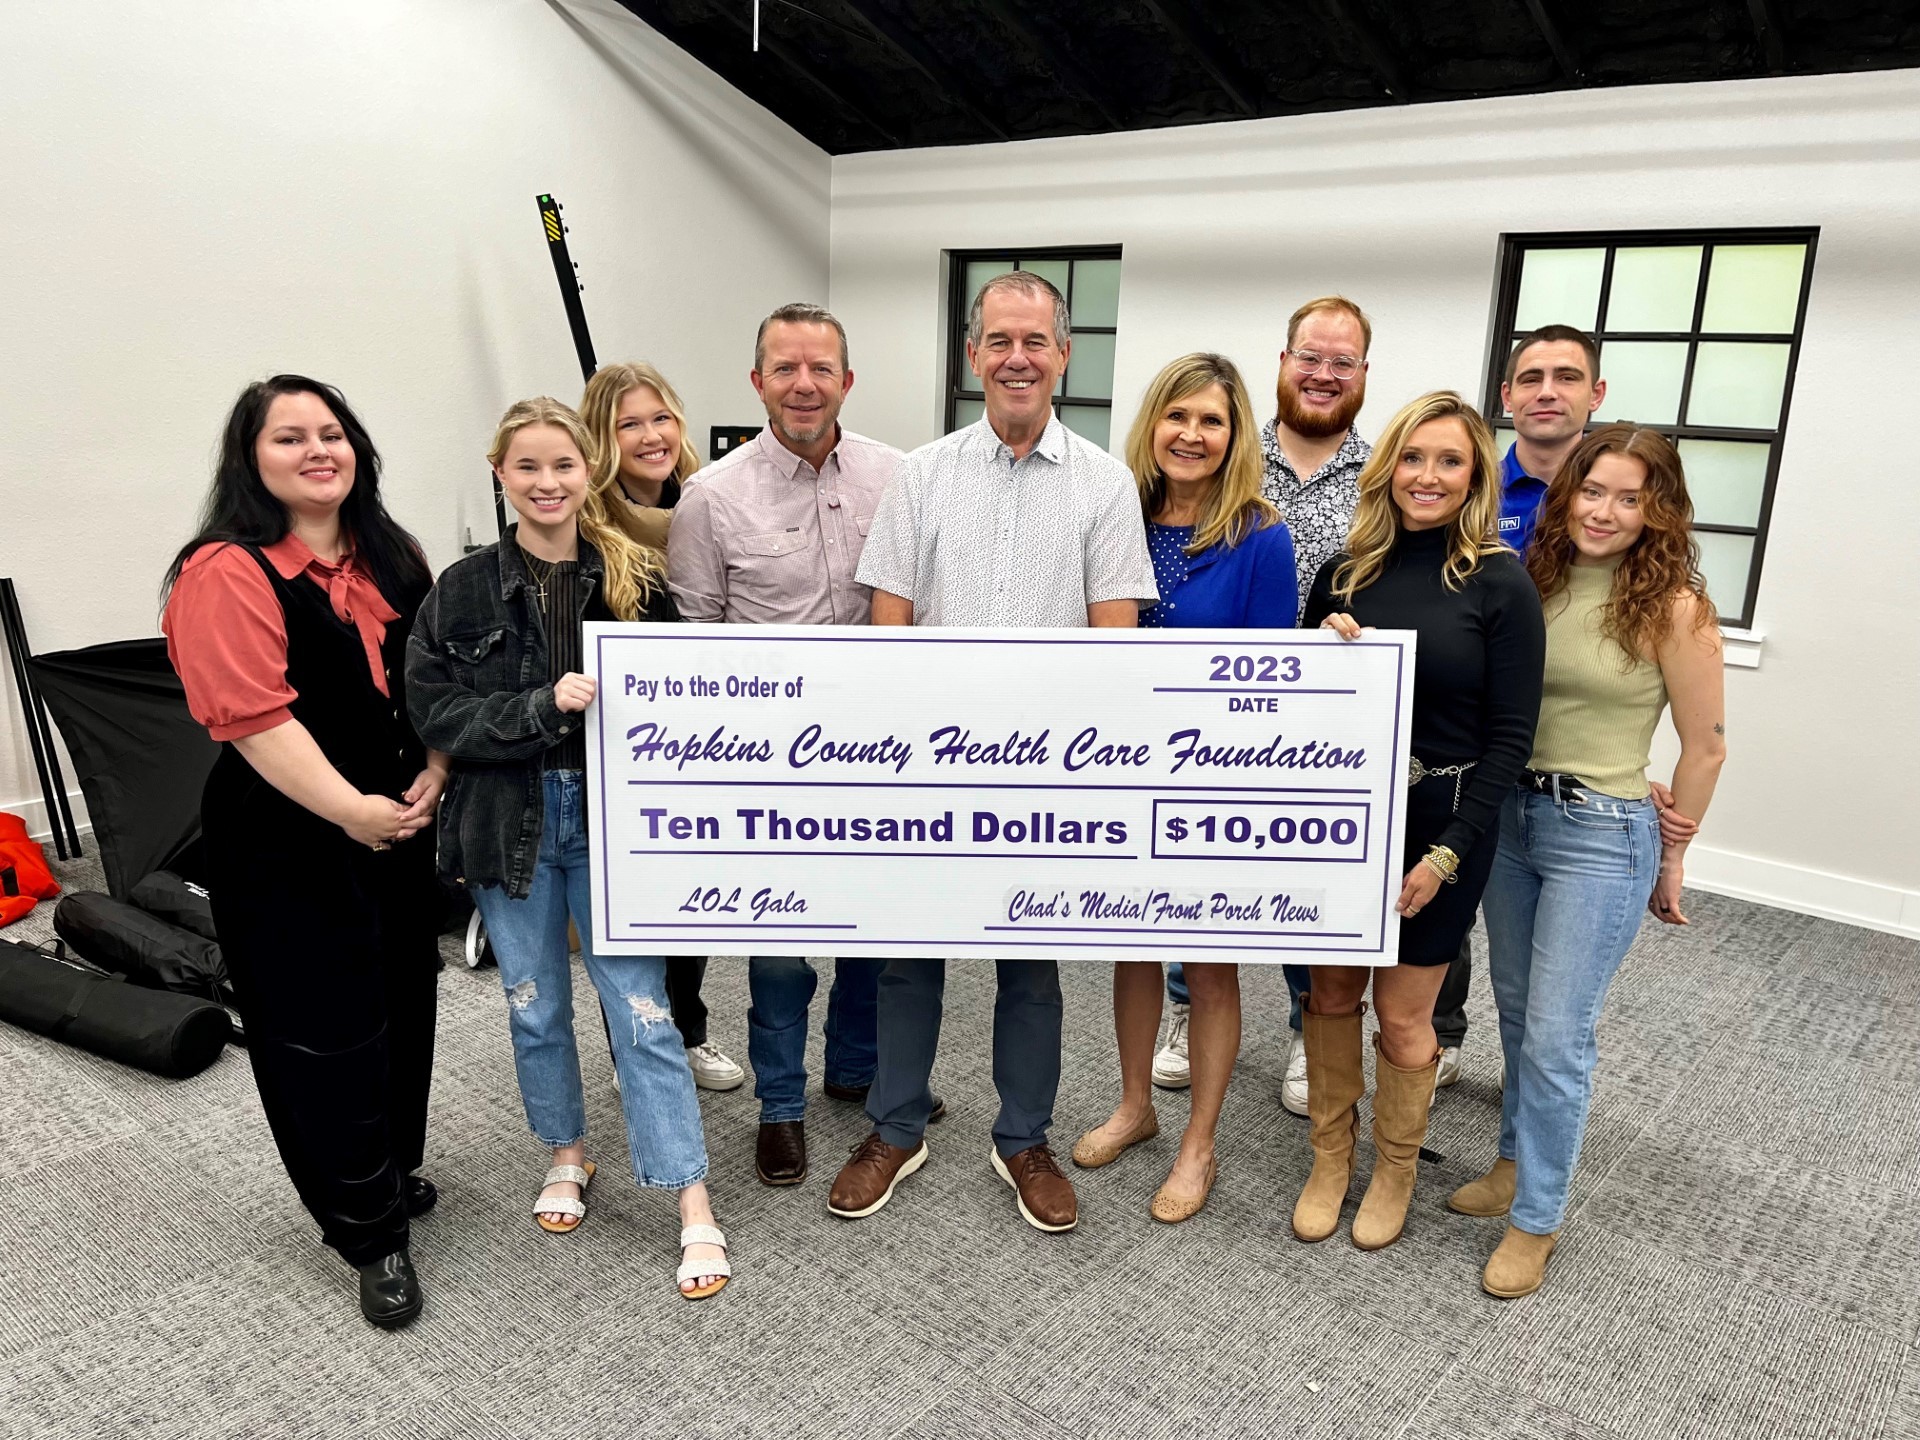 Chad’s Media and The Hopkins County Health Care Foundation